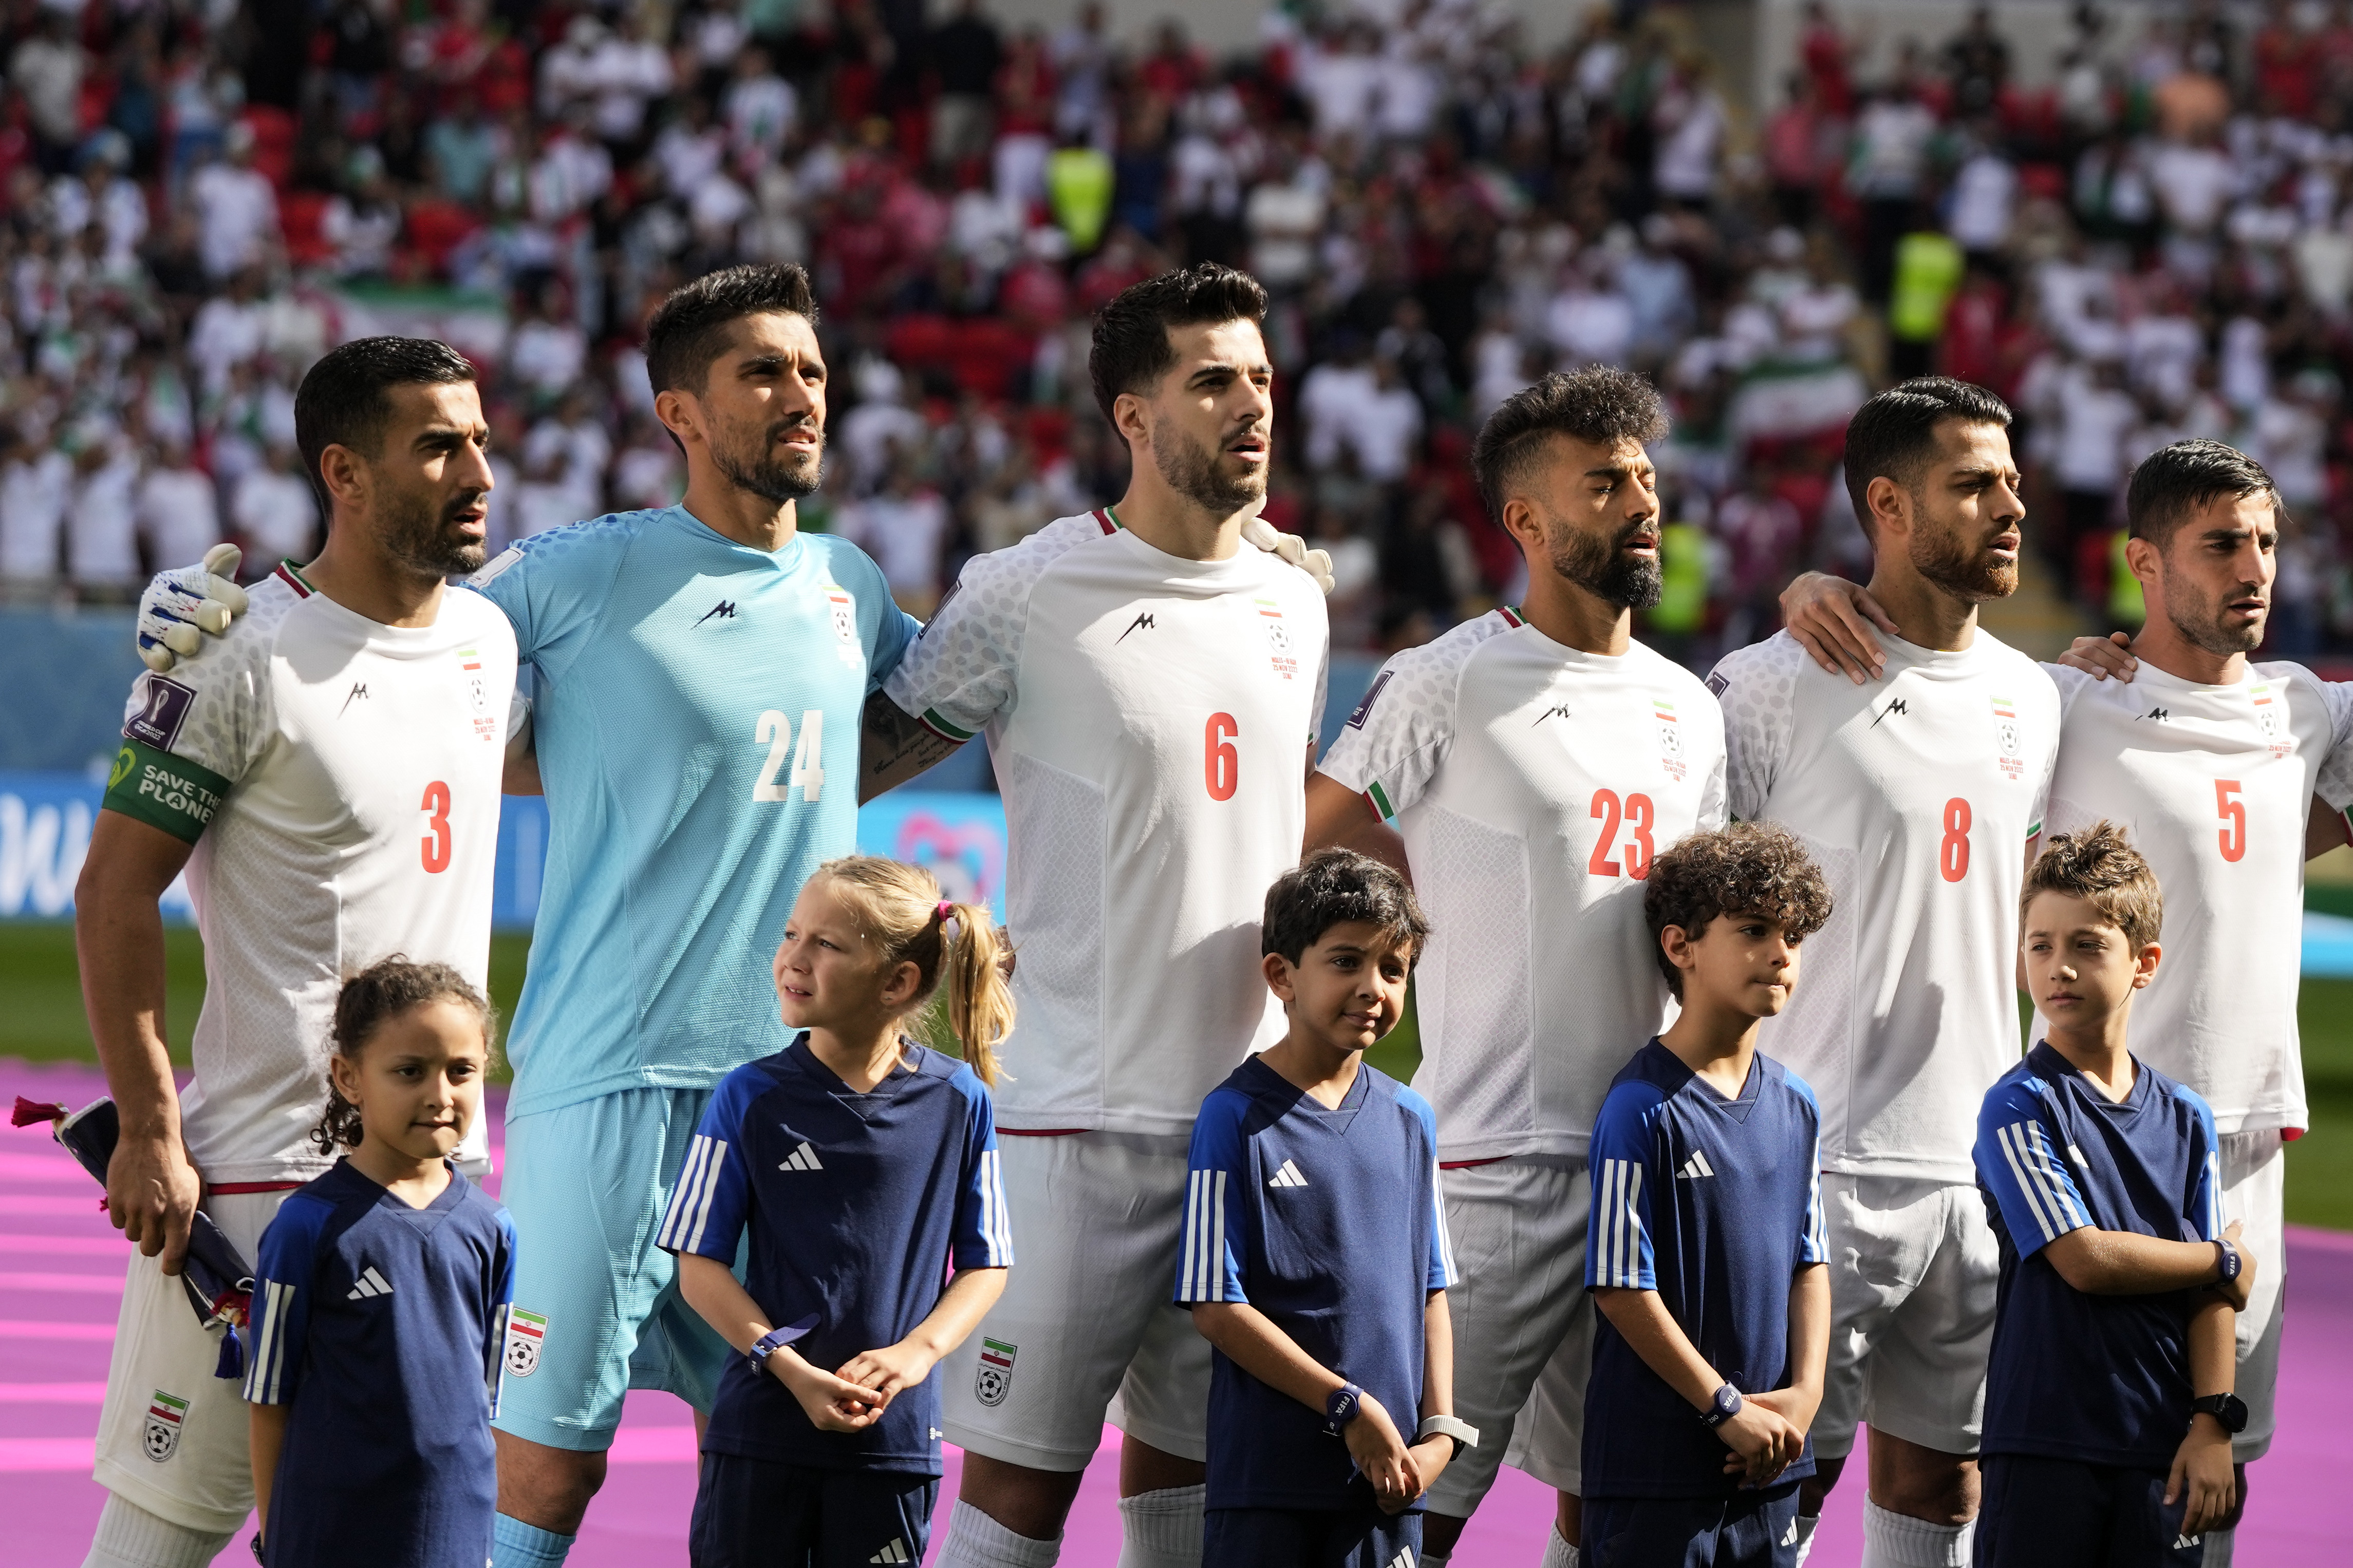 Irans World Cup team mouths along to national anthem ahead of Wales match 